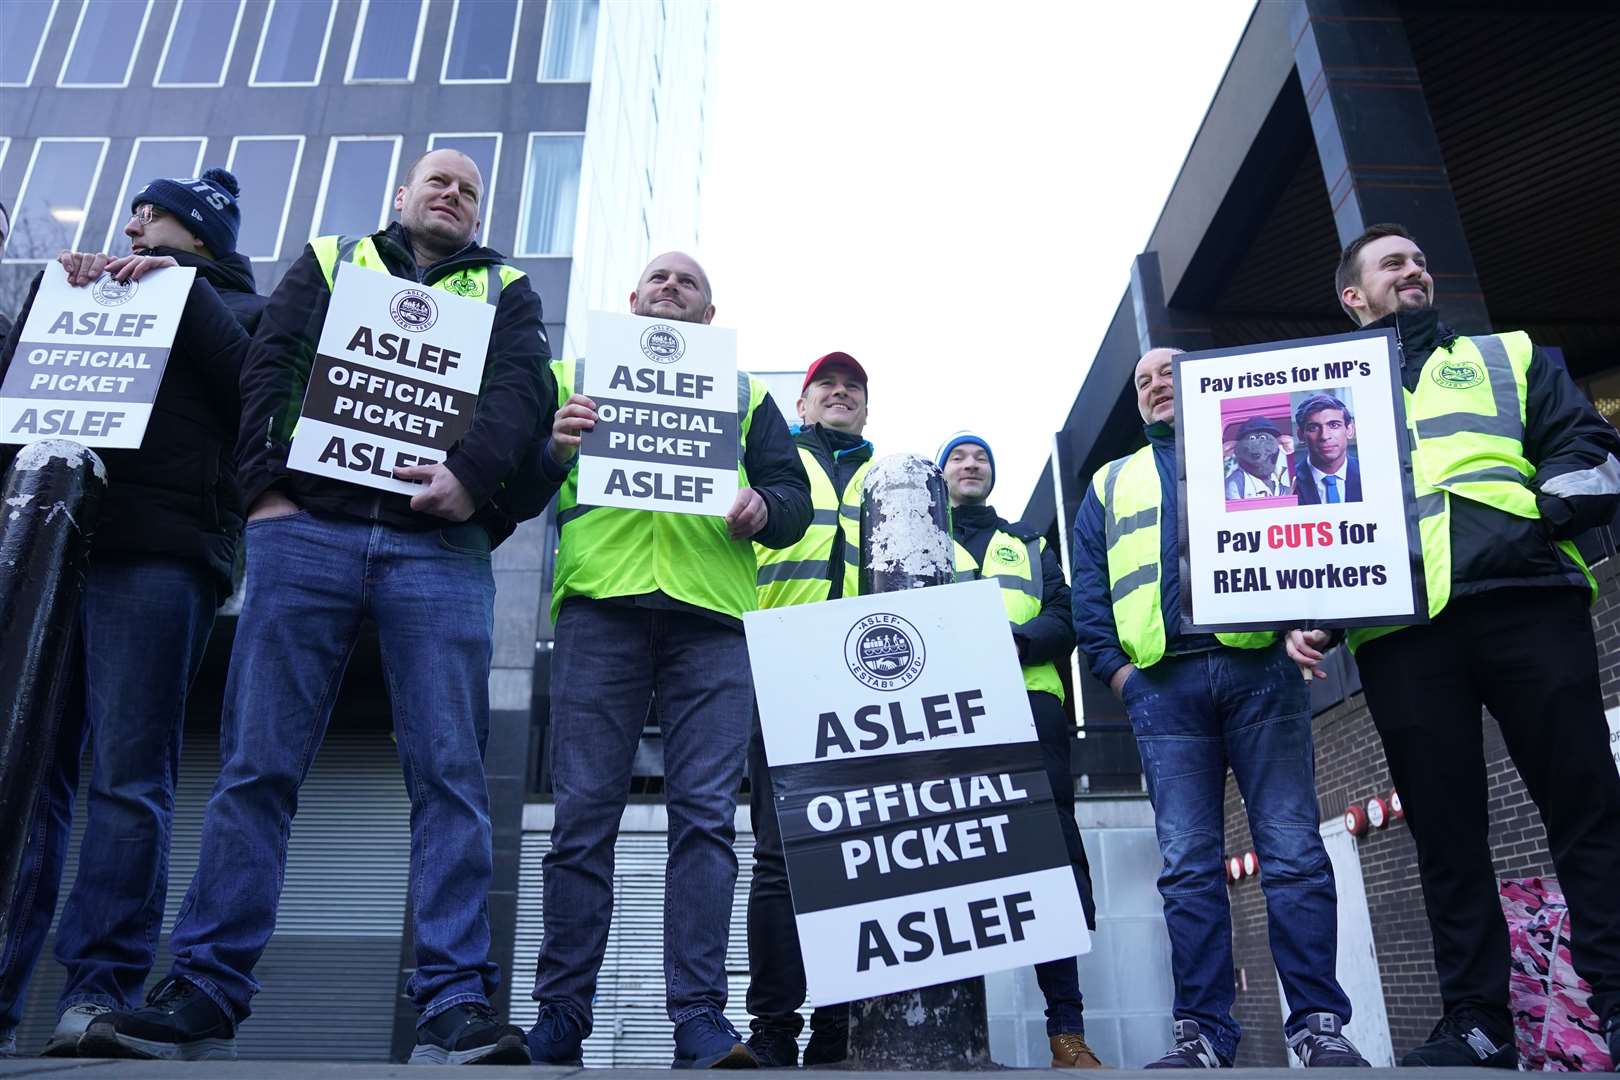 Members of the Aslef union on the picket line outside London Euston (Kirsty O’Connor/PA)